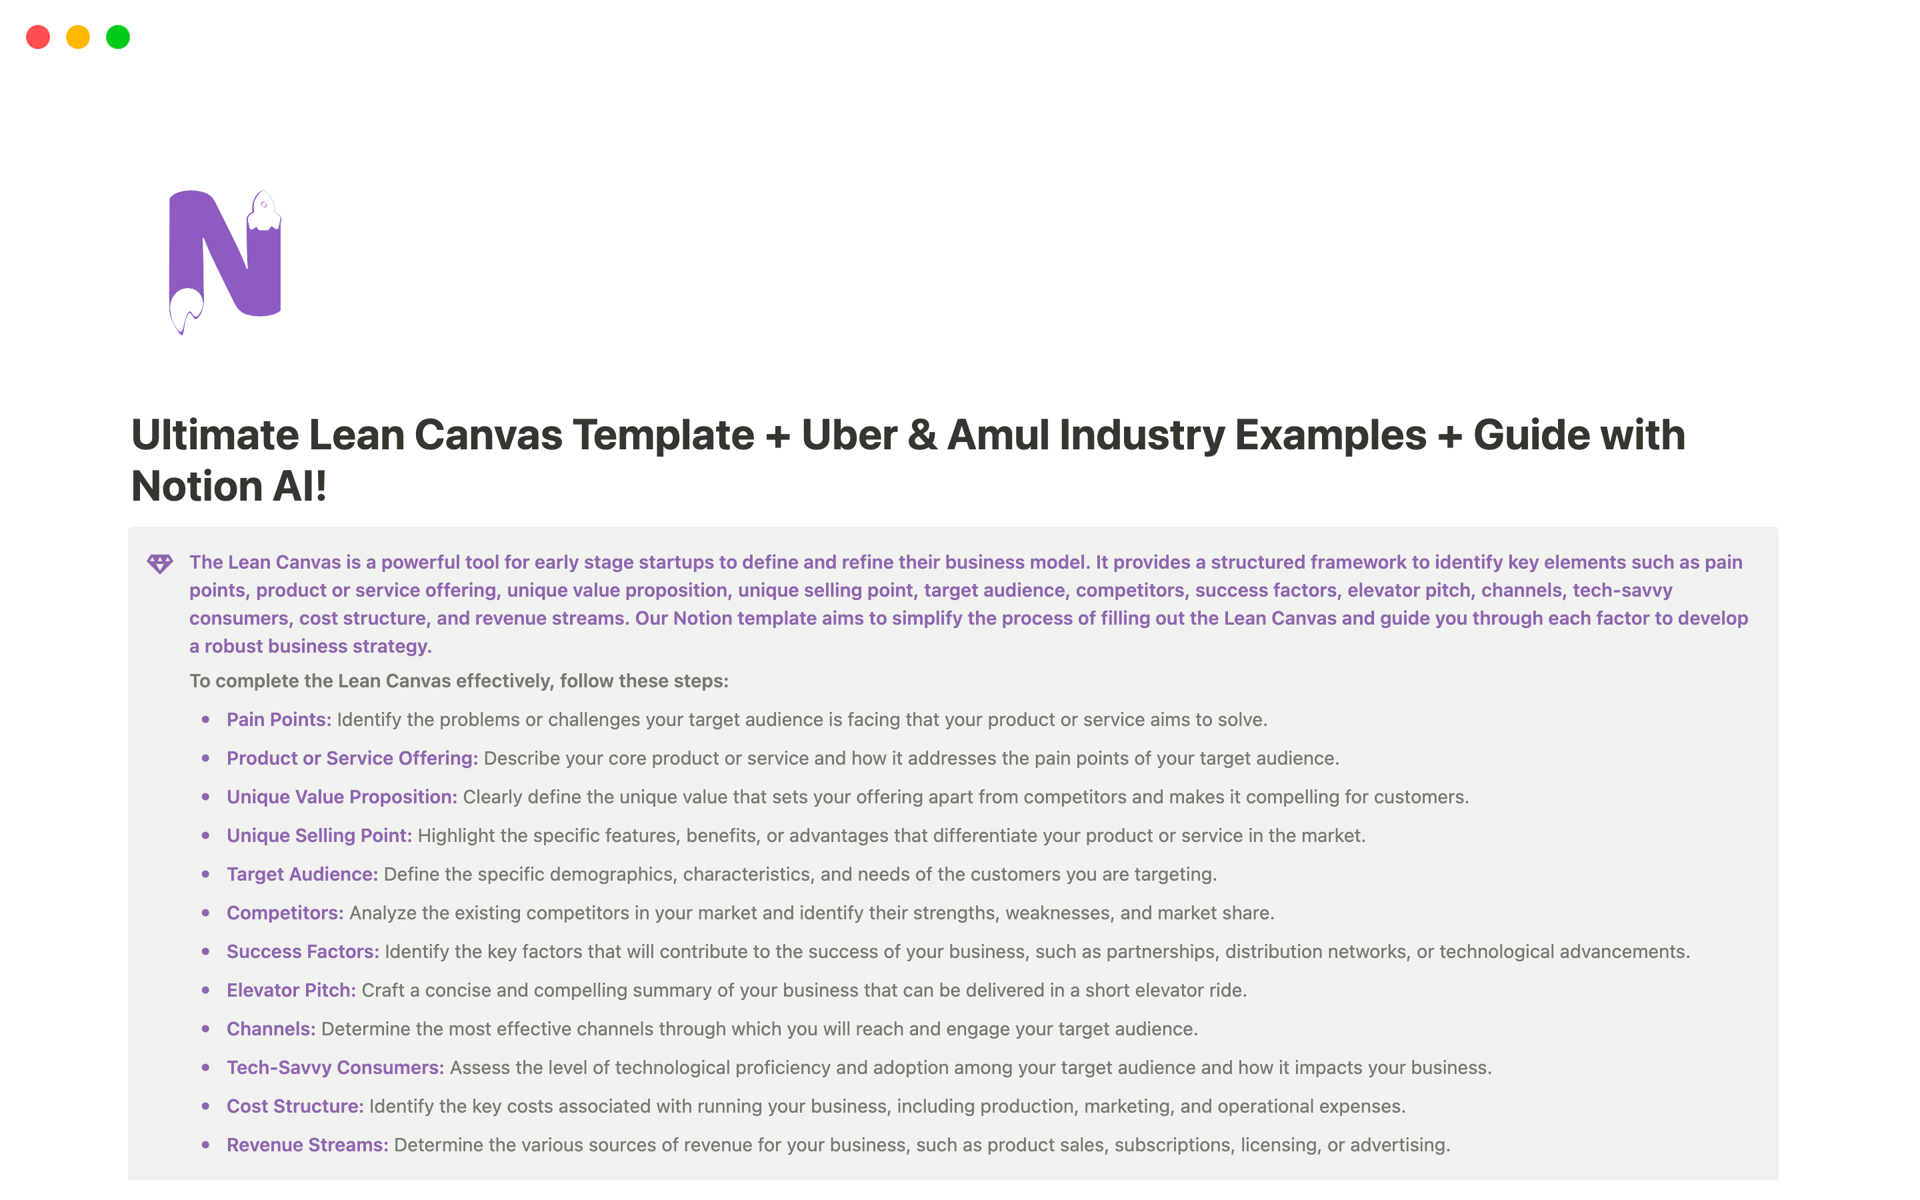 Ultimate Lean Canvas with examples of Uber & Amul님의 템플릿 미리보기